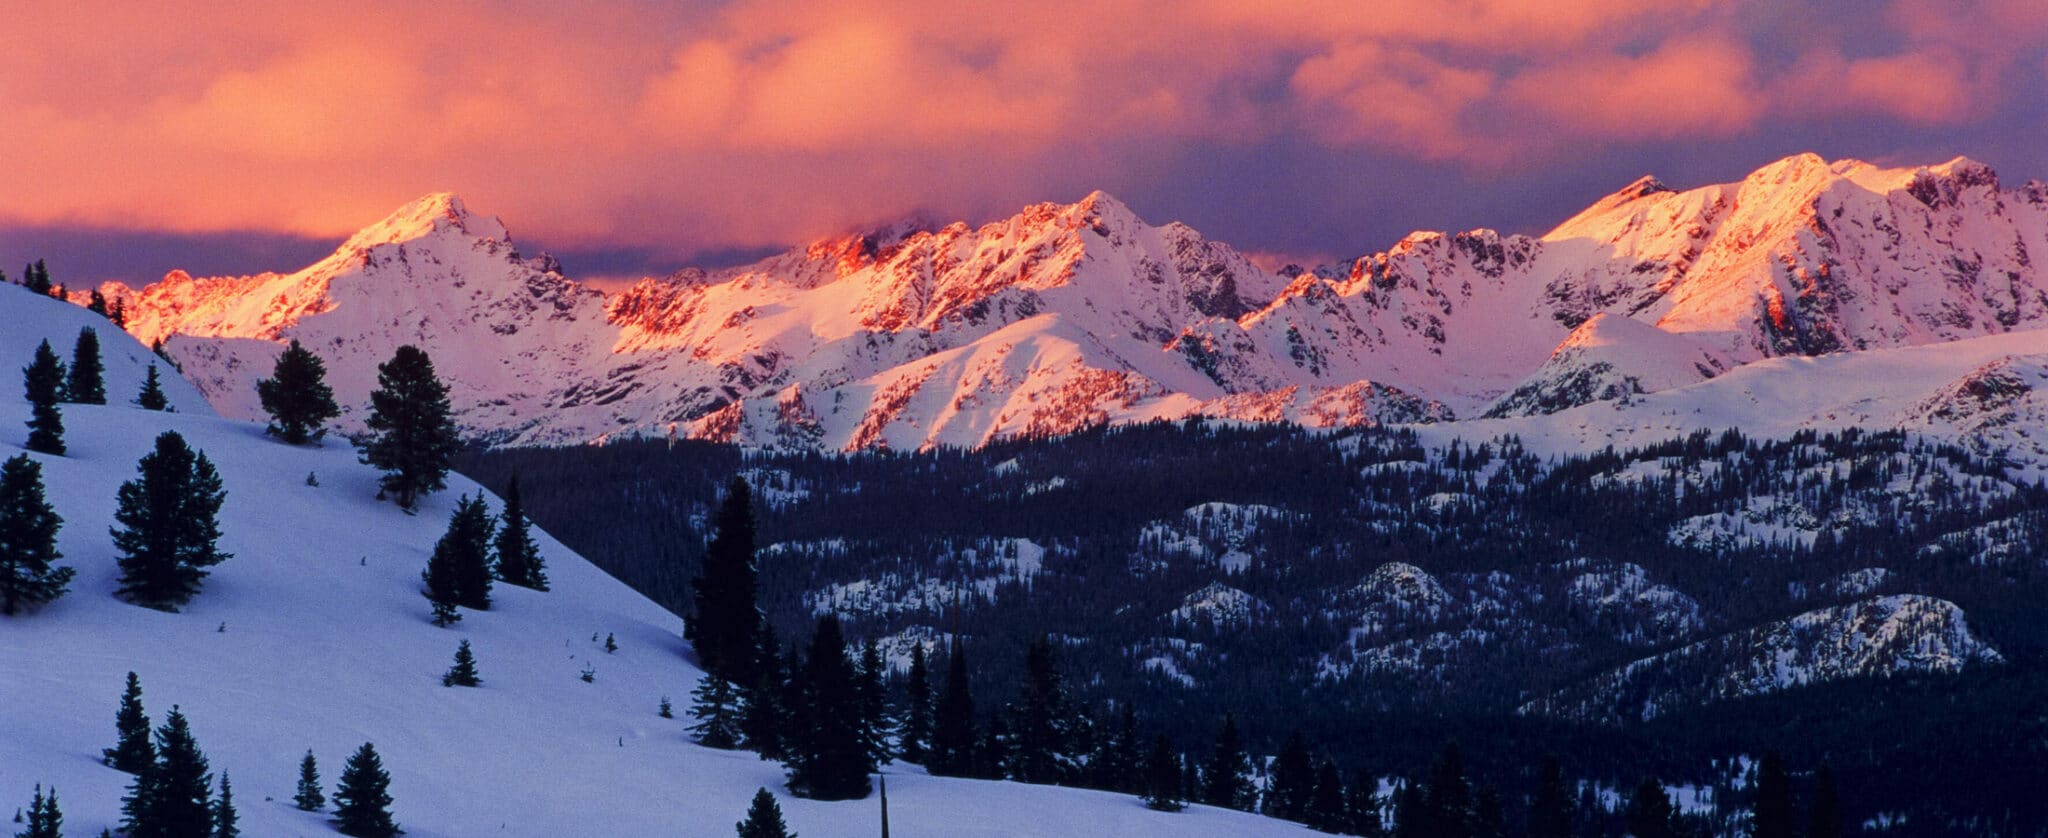 The mountains of Vail Colorado are covered in a blanket of snow. As the sun goes down, the sky and snow are painted in tones of pink.